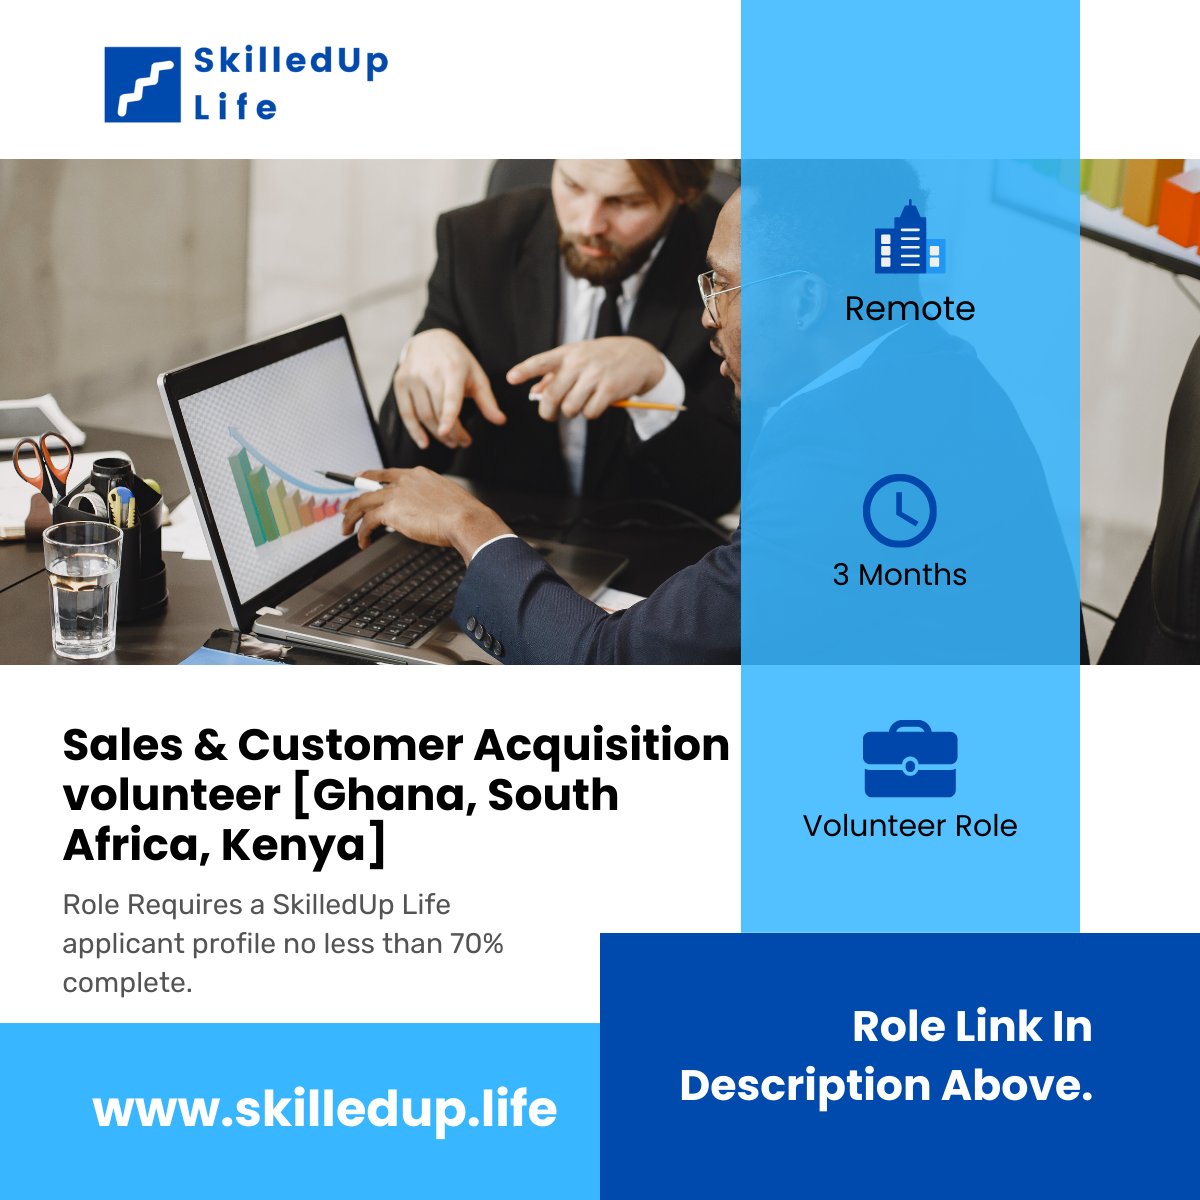 @SkilledUpLife is seeking a Volunteer Sales & Customer Acquisition expert in Ghana! Be part of an exciting journey connecting talented volunteers with startups. Apply today! skilledup.life/opportunity/sk… #Ghana #VolunteerOpportunity #Sales #SkilledUpLife